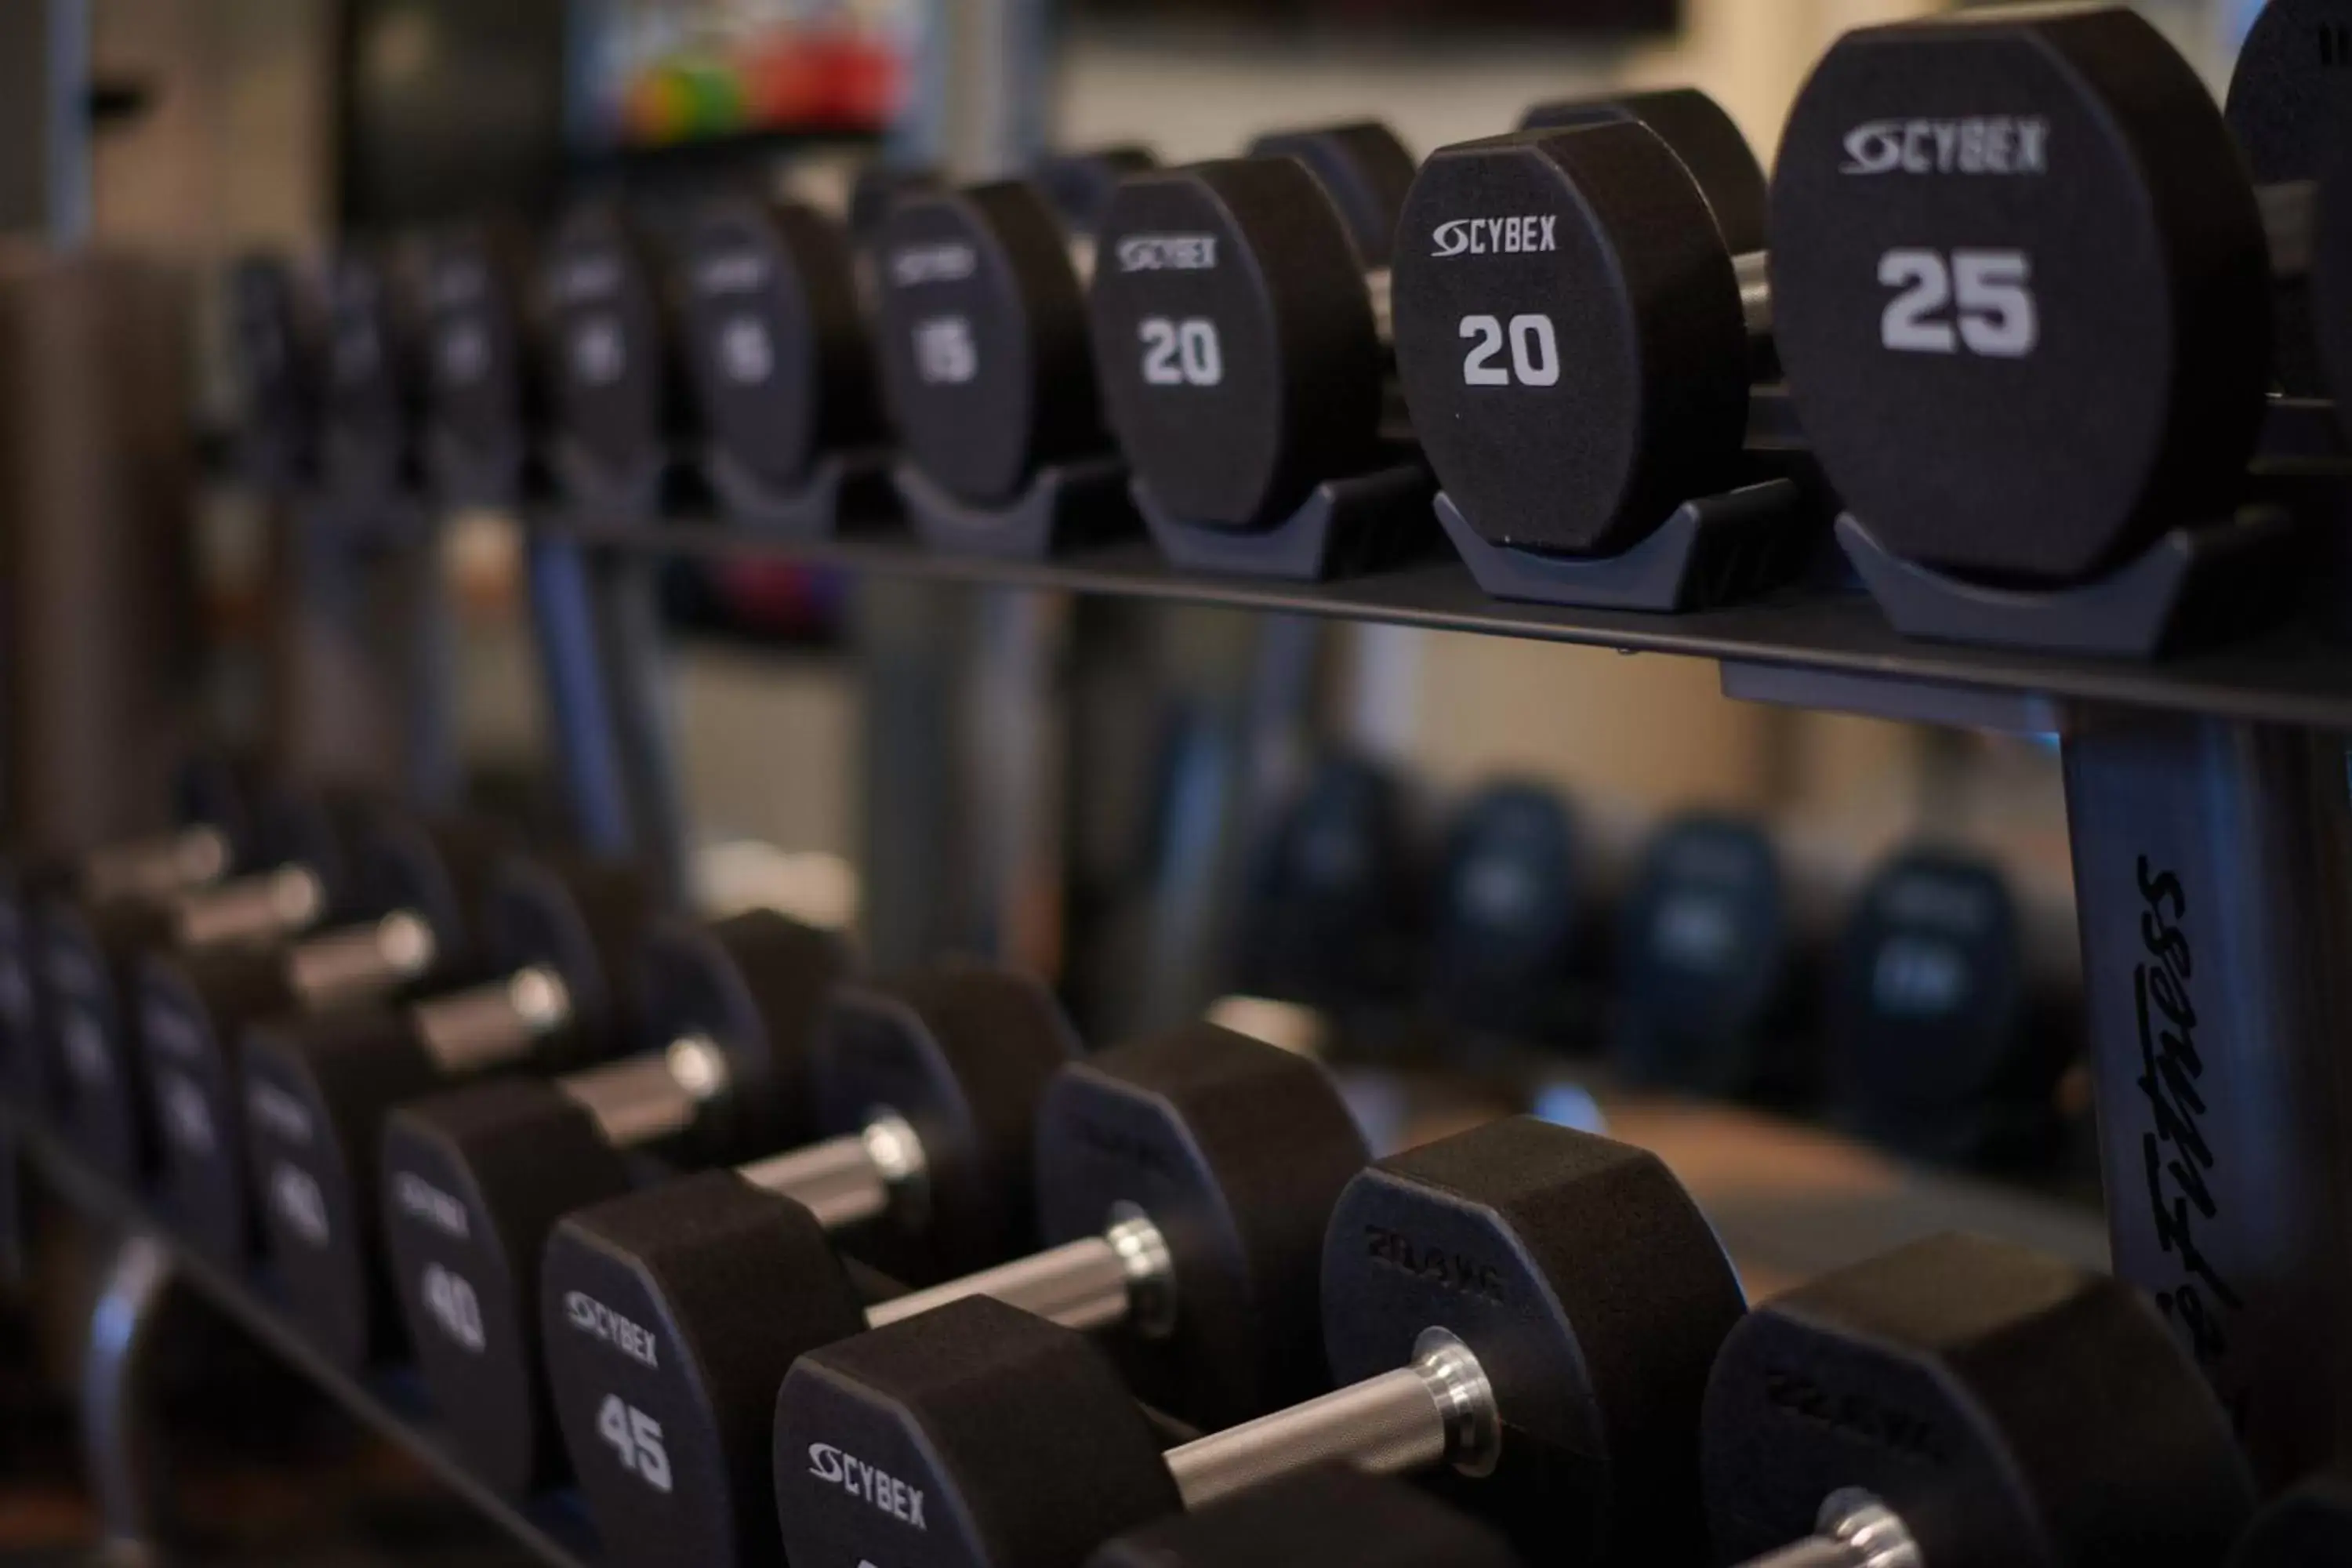 Fitness centre/facilities, Fitness Center/Facilities in Hotel Drover, Autograph Collection